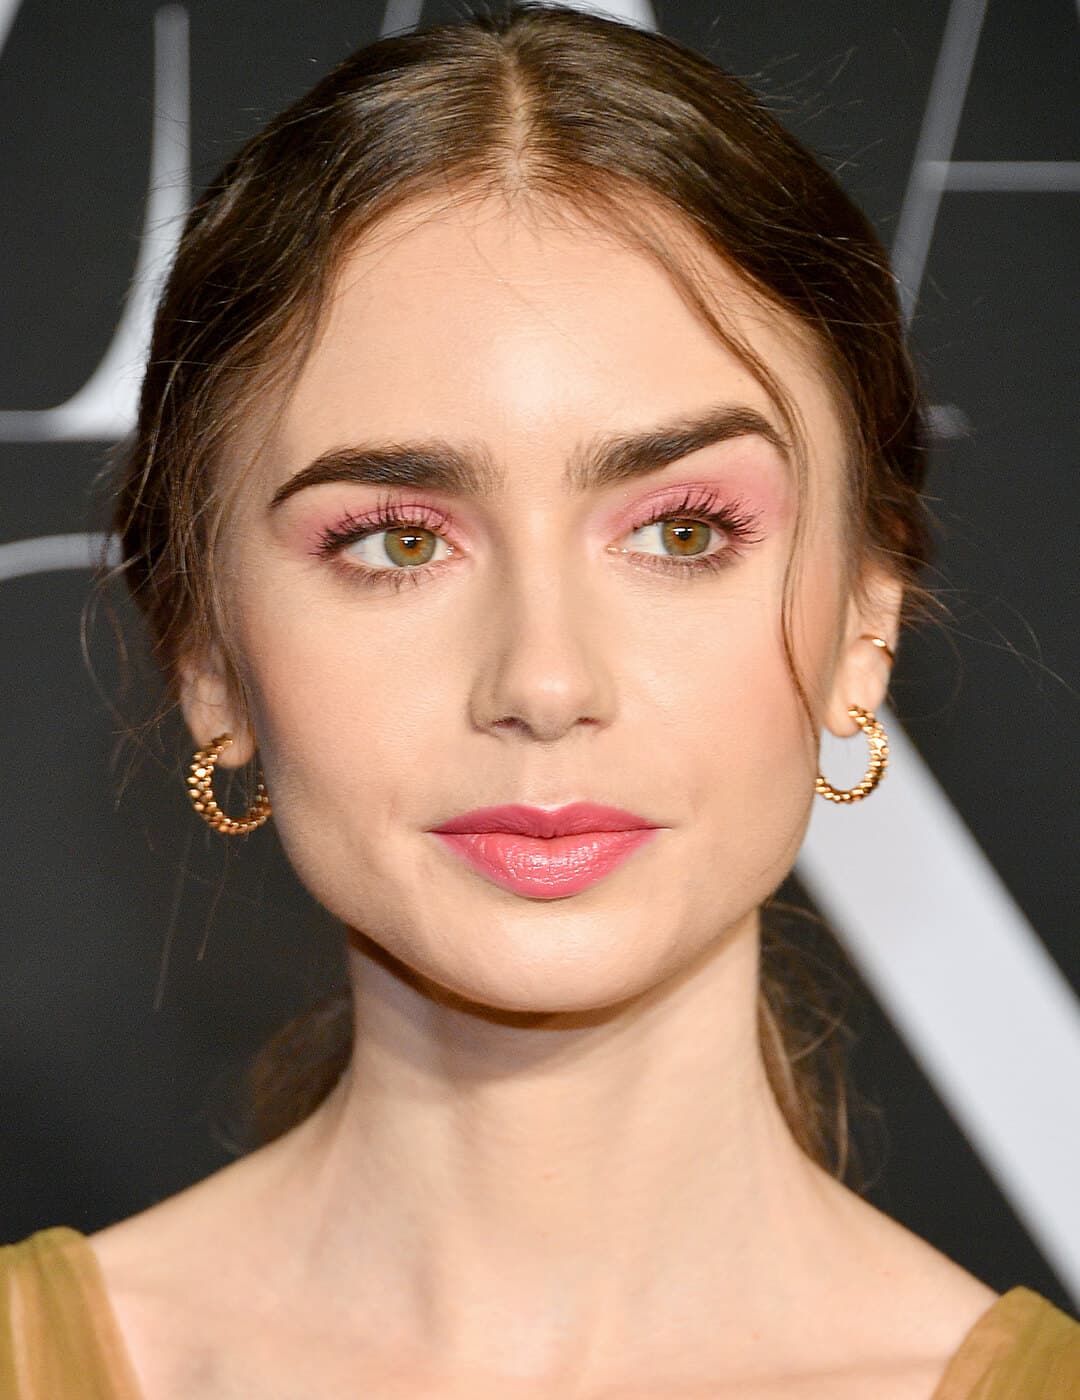 Lily Collins rocking a pink monochromatic makeup look and mustard dress on the red carpet